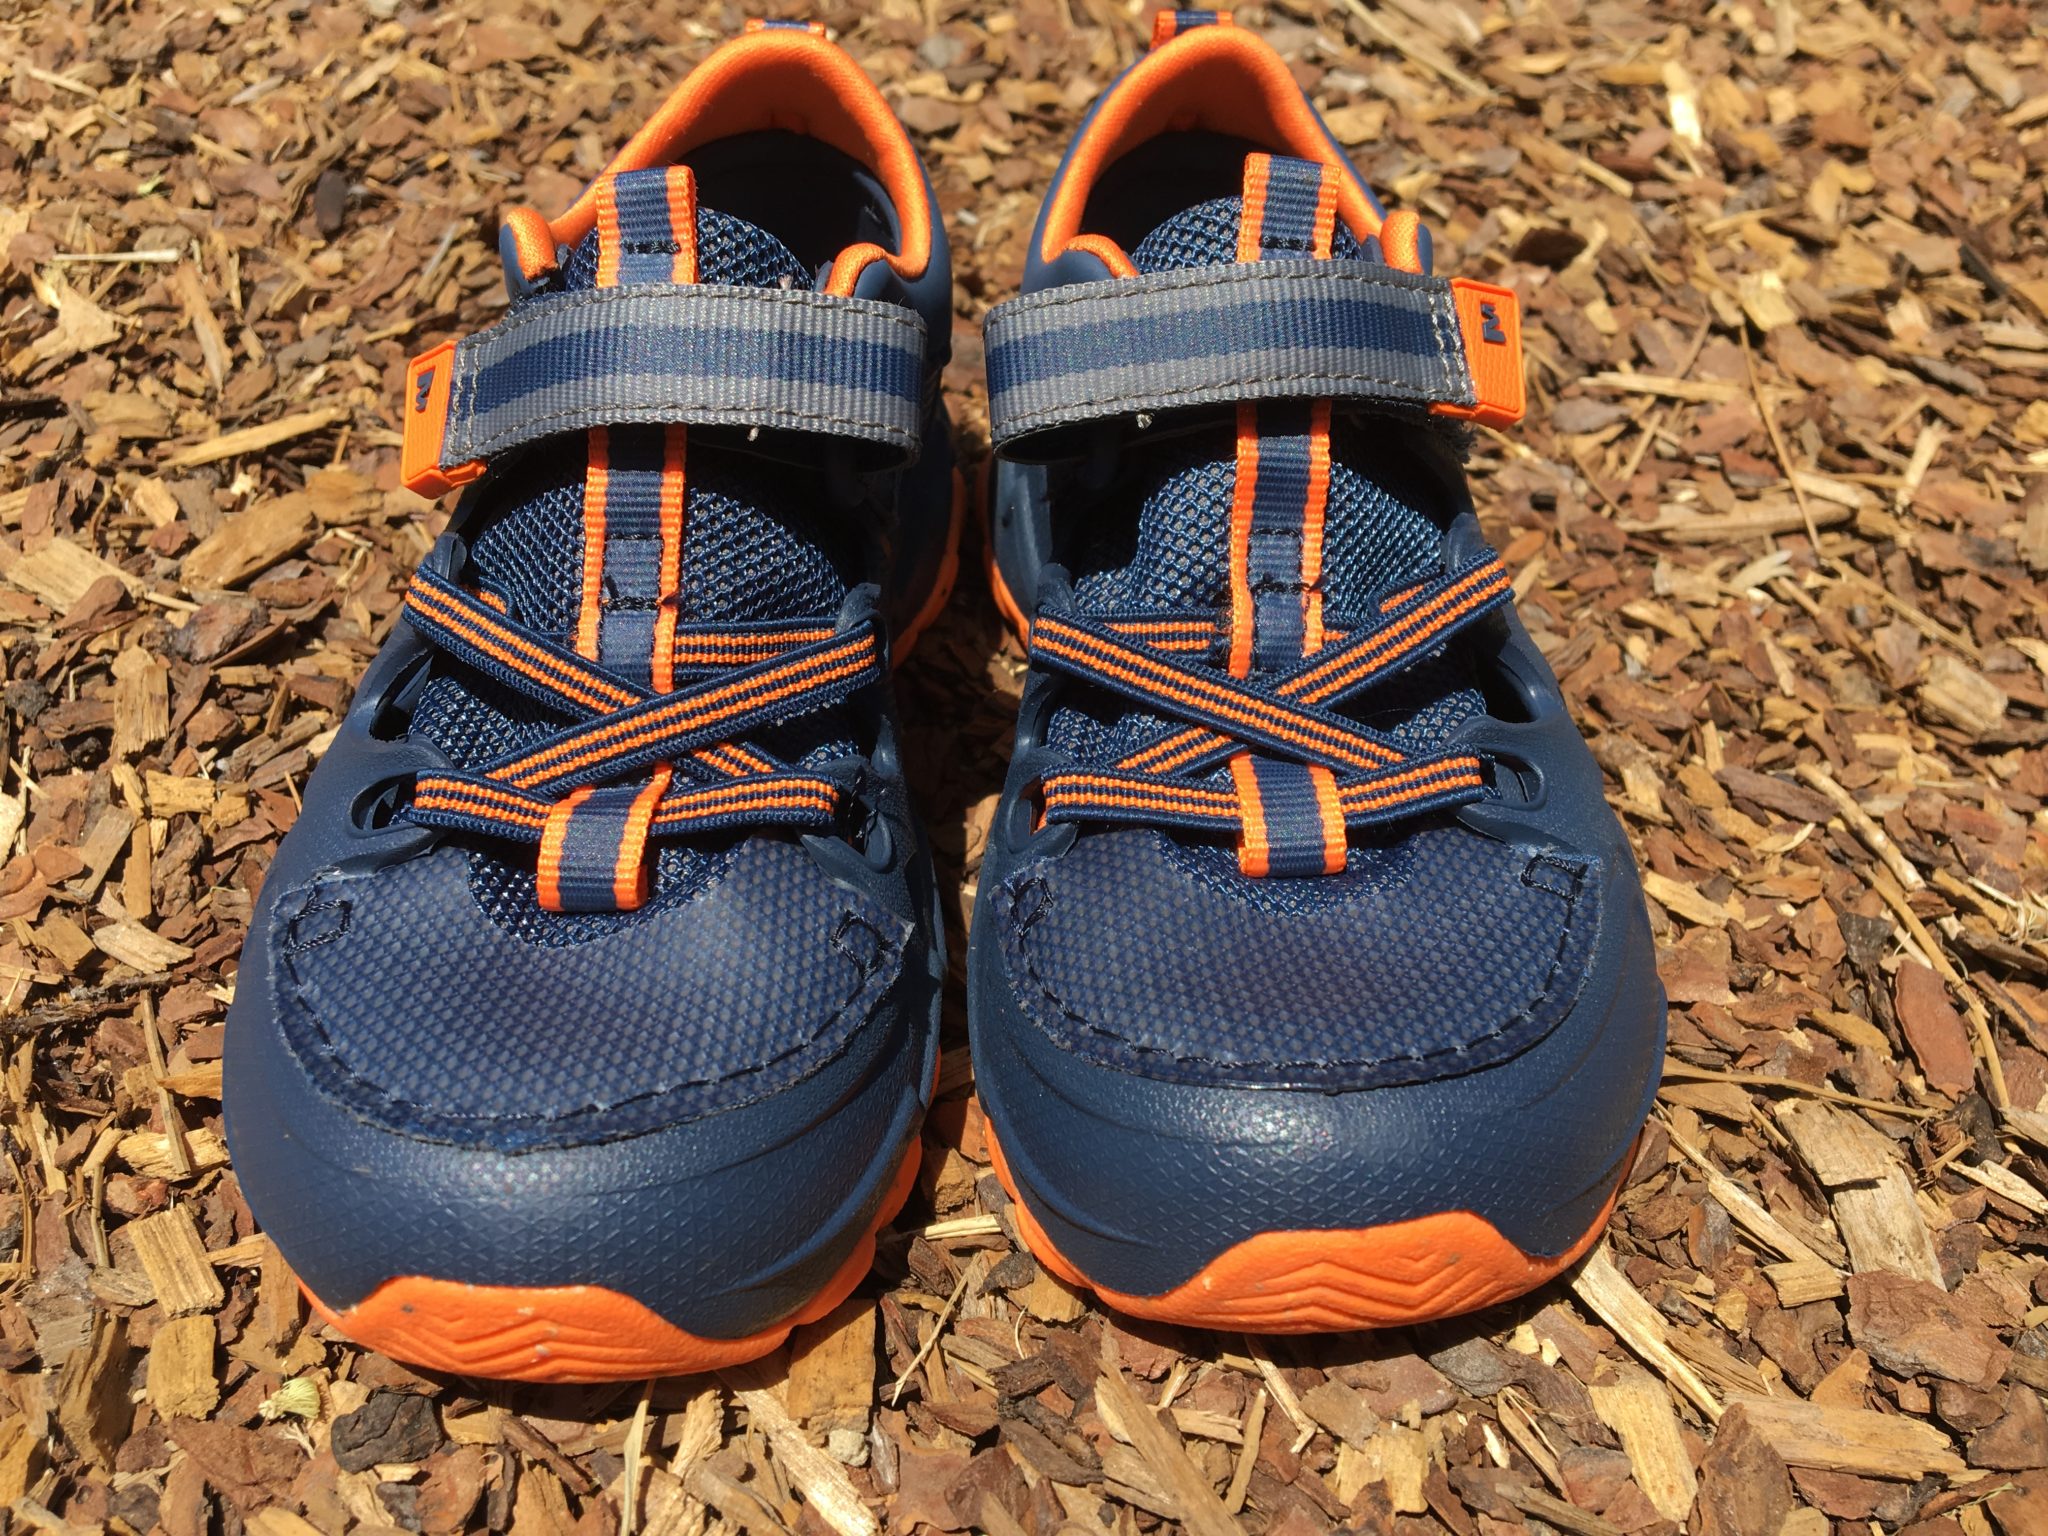 Merrell Kids Hydro 2.0 Review - Hiking Lady